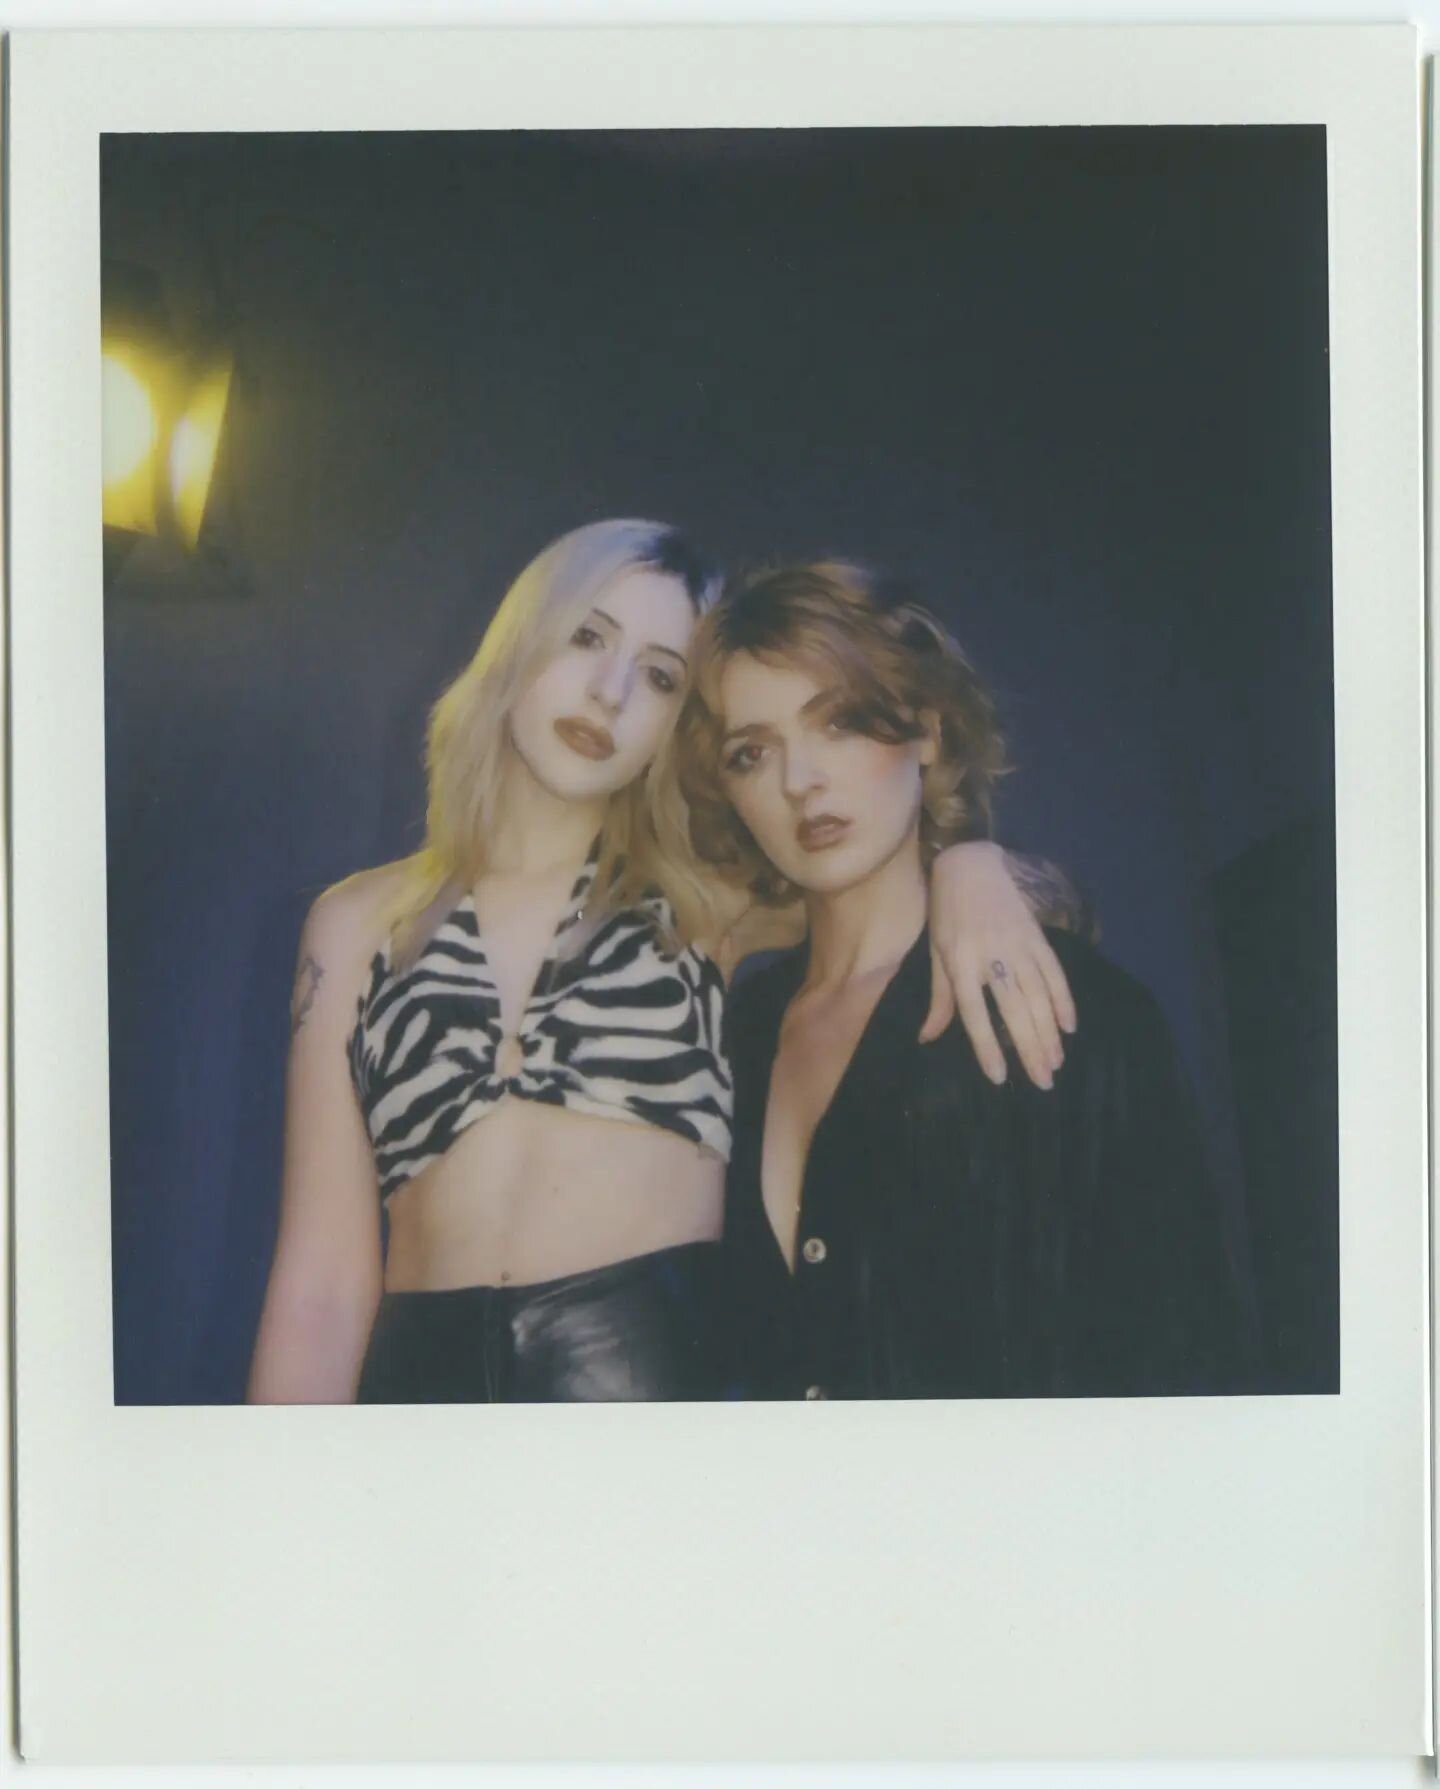 Polaroids featuring LA based photographer and model @sofie.dmg with our very own @fragilemachine from behind the scenes of a creative shoot day at the start of the month

#brisbane #polaroid #studio #studiolife #instantfilm #modeling #instax #brisban